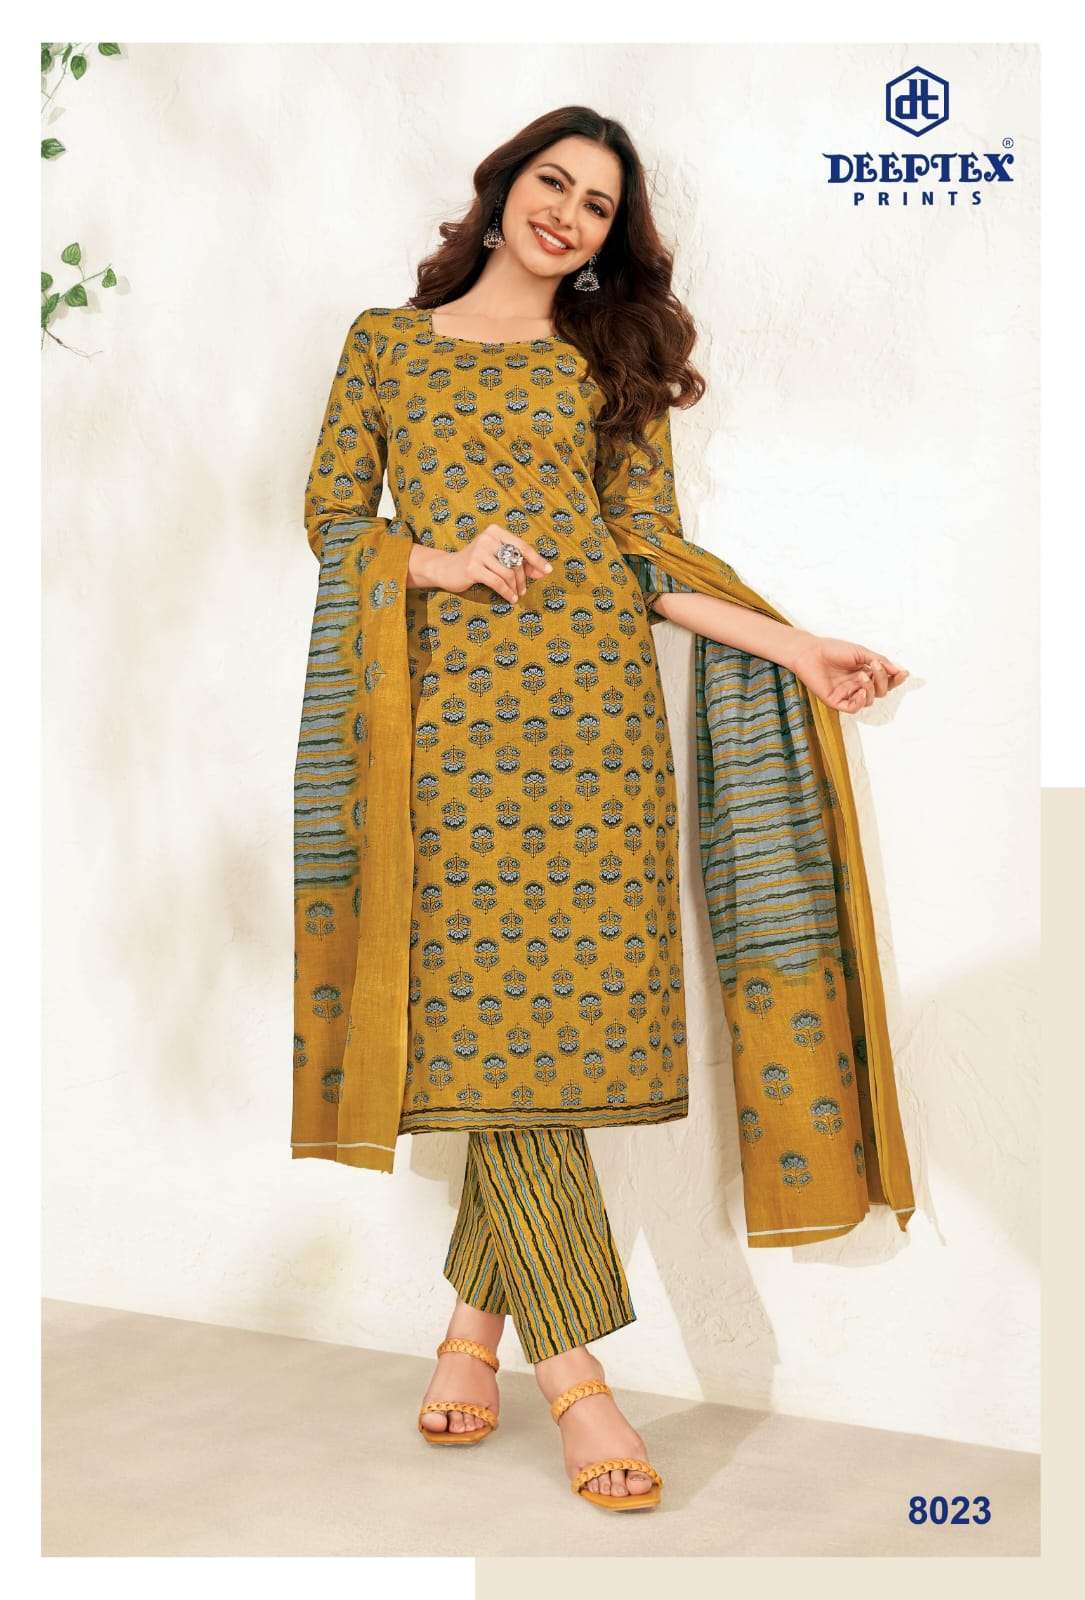 Deeptex Prints Miss India Vol 80 Cotton with printed dress m...